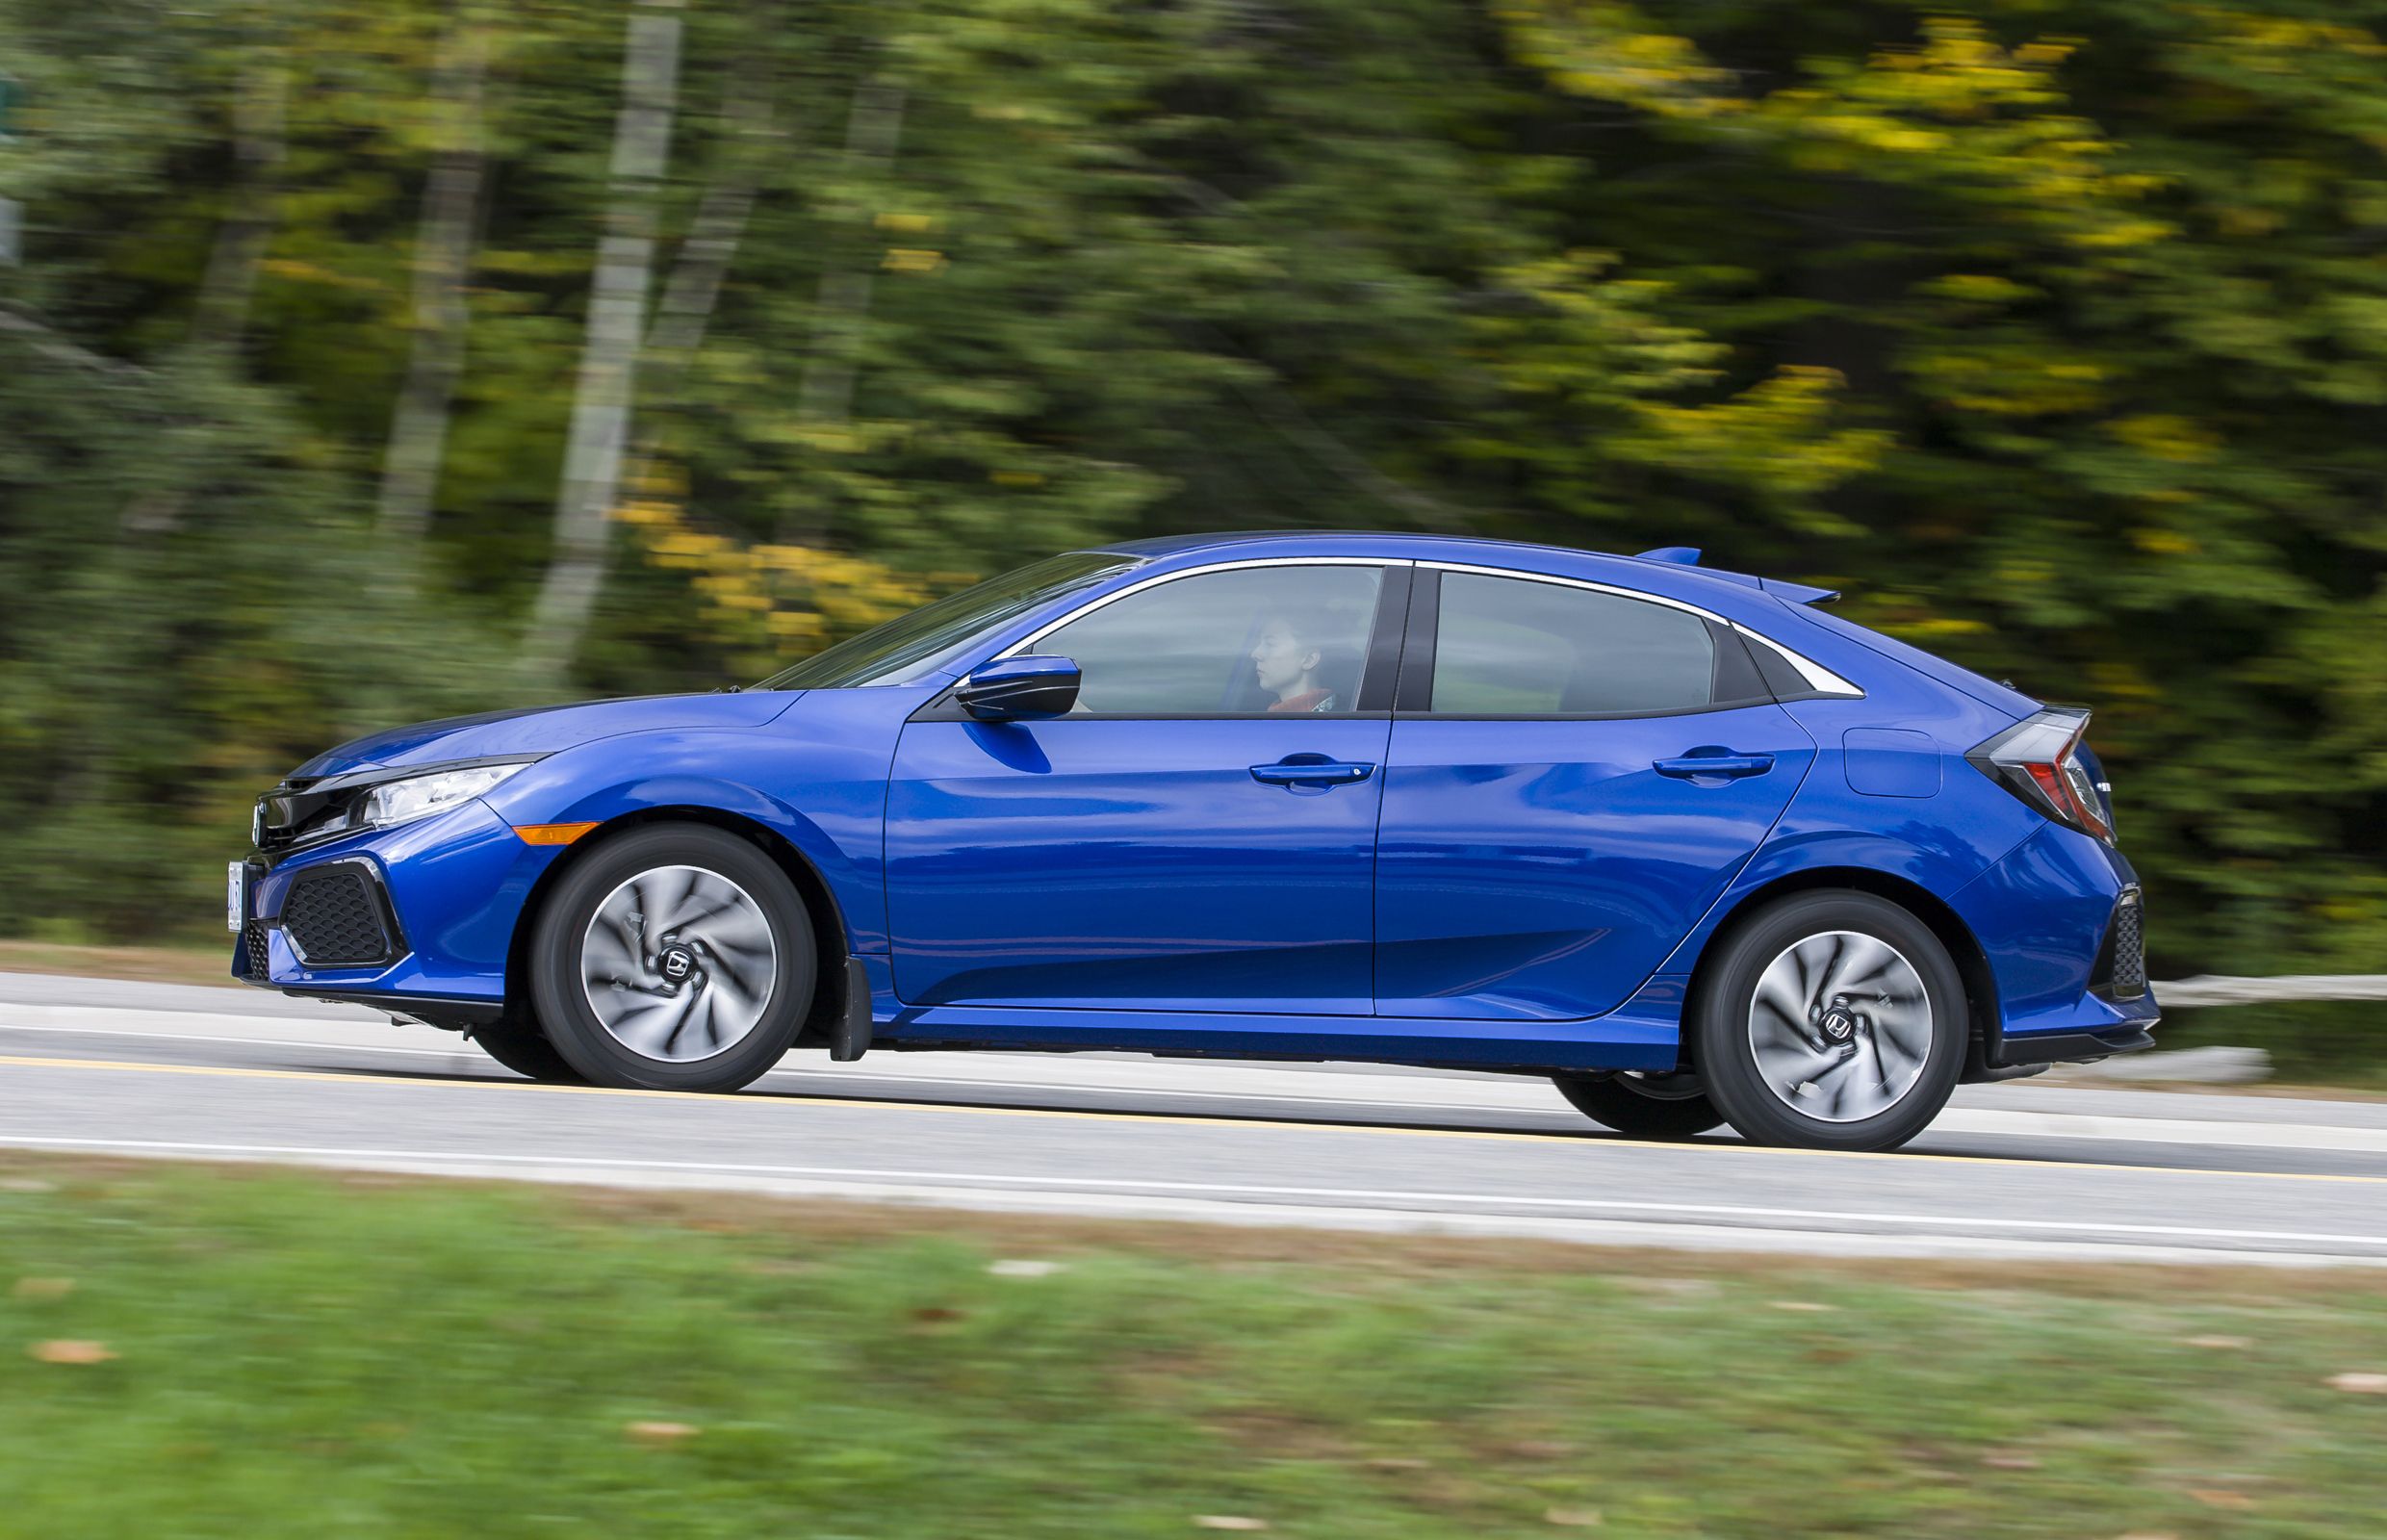 Buying a Used Honda Civic? 6 Things To Lookout For!